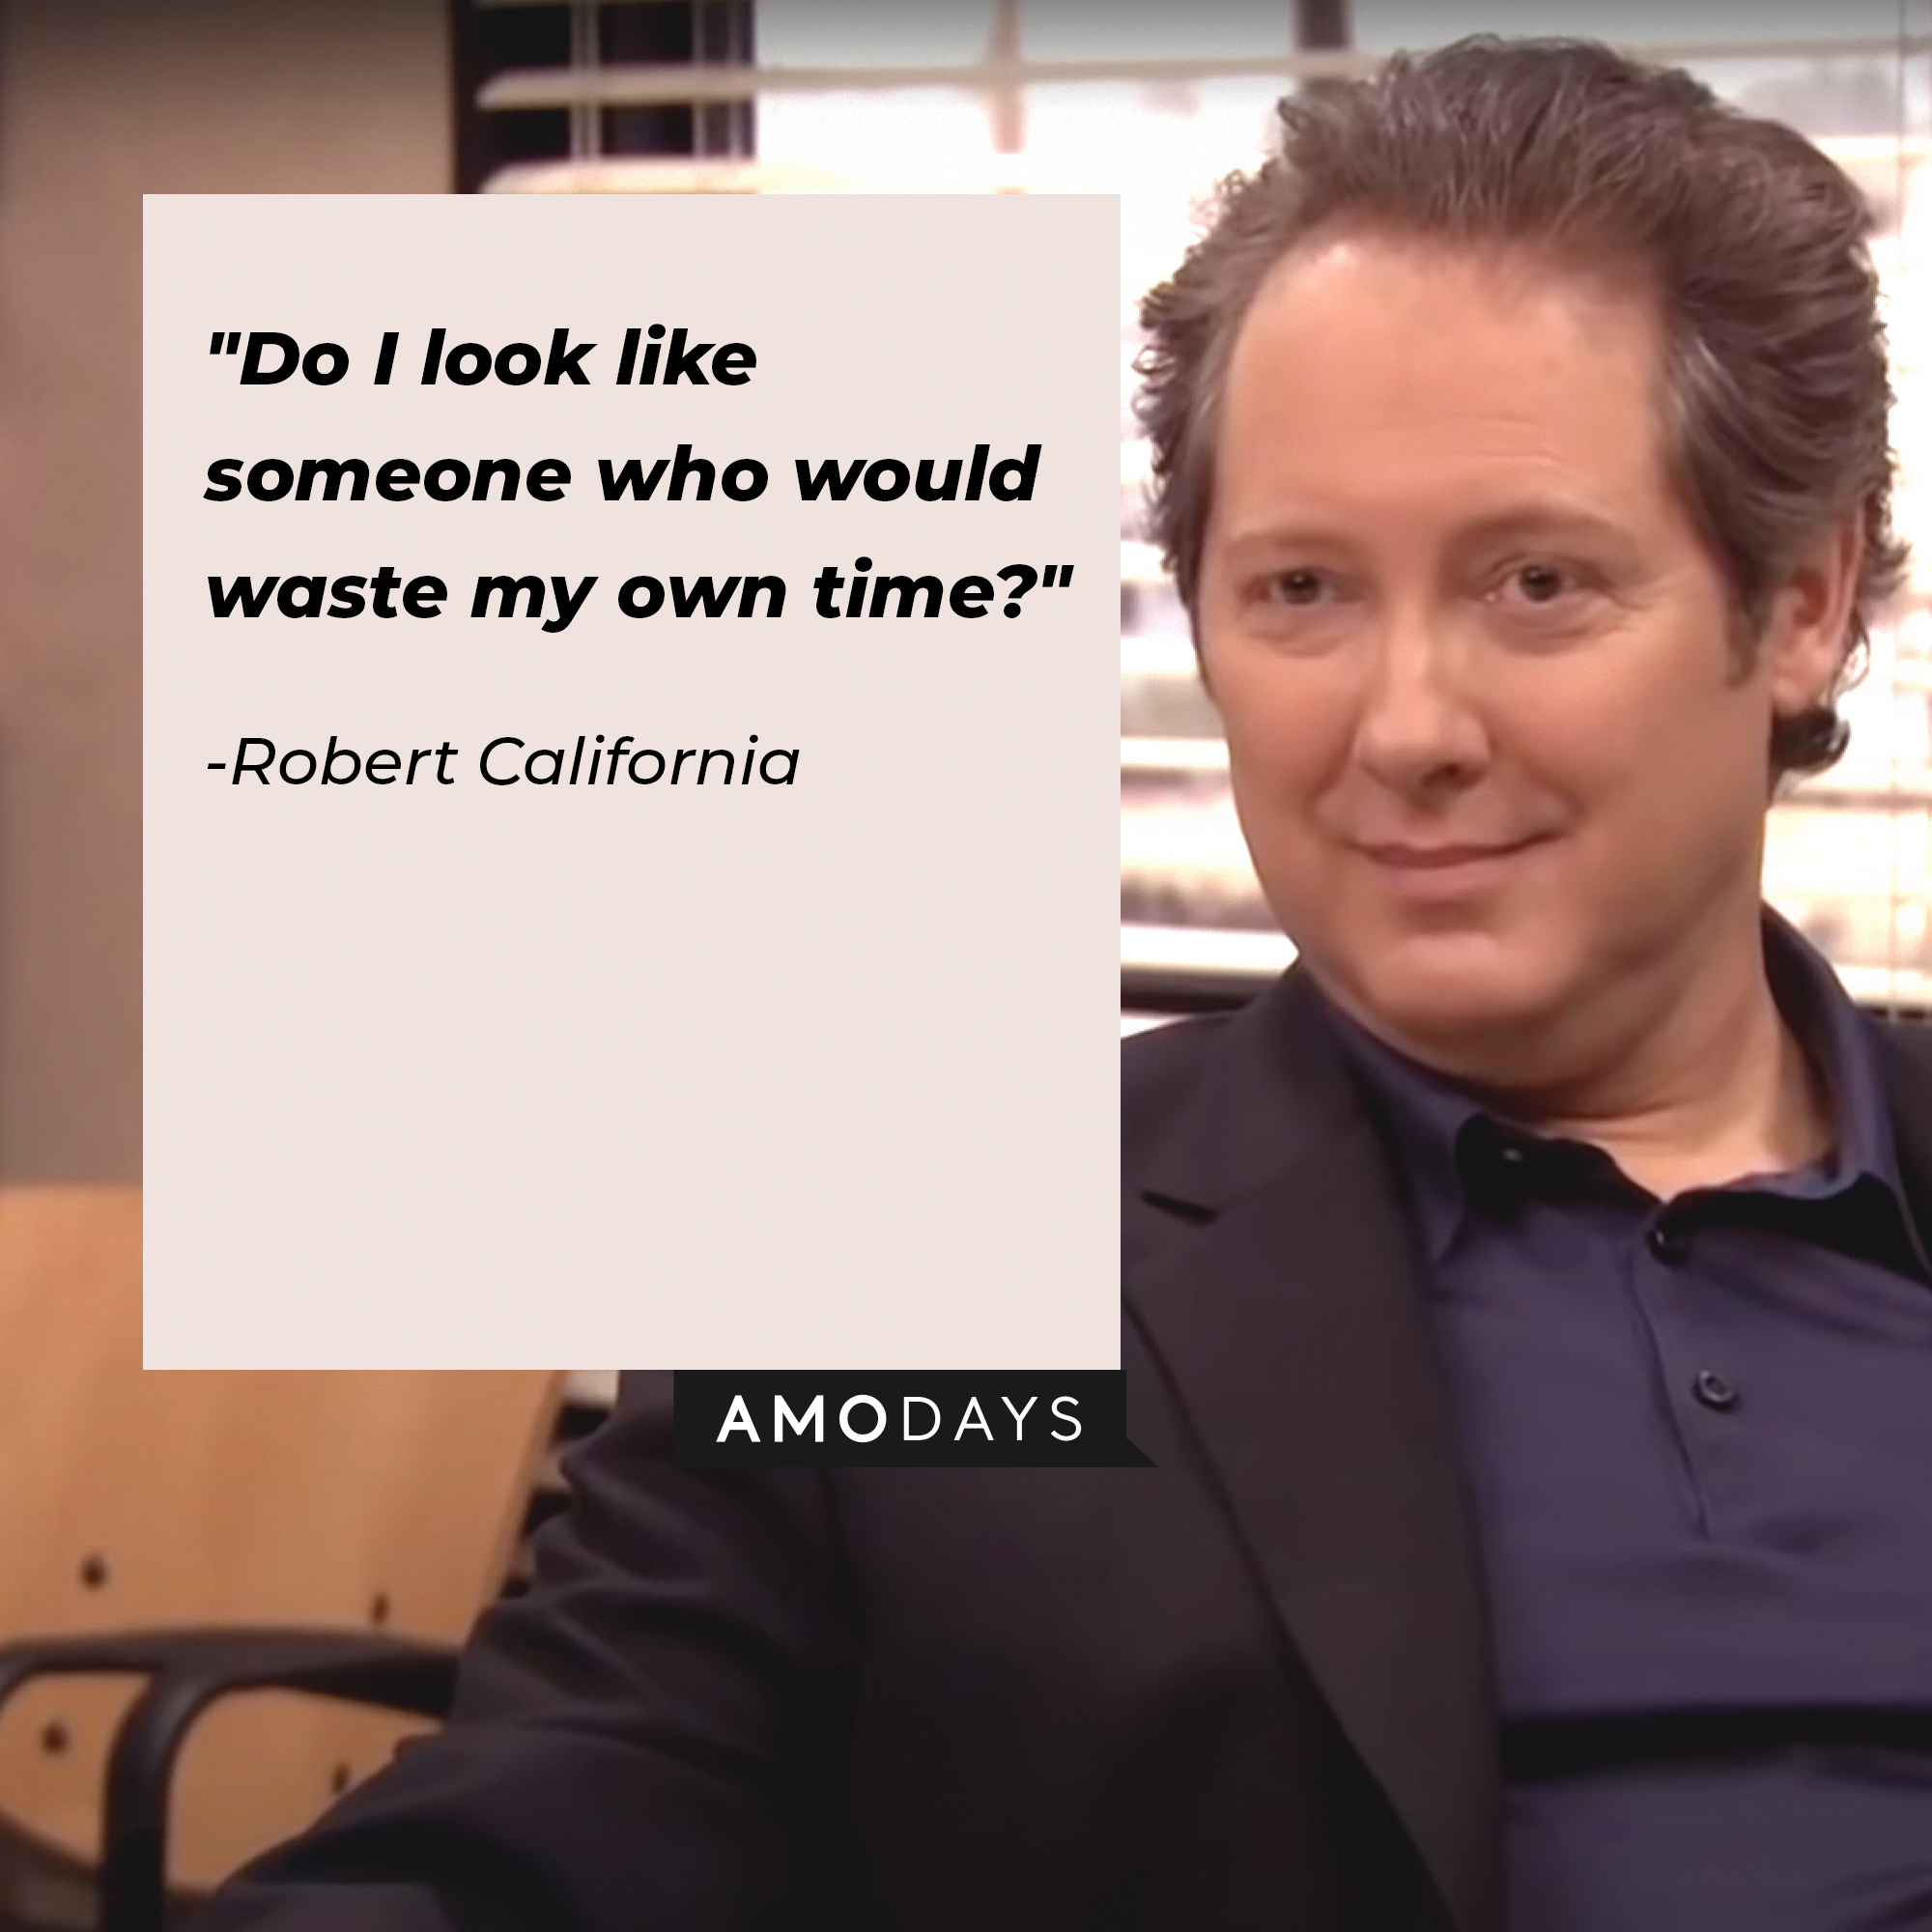 Robert California's quote: "Do I look like someone who would waste my own time?" | Image: AmoDays